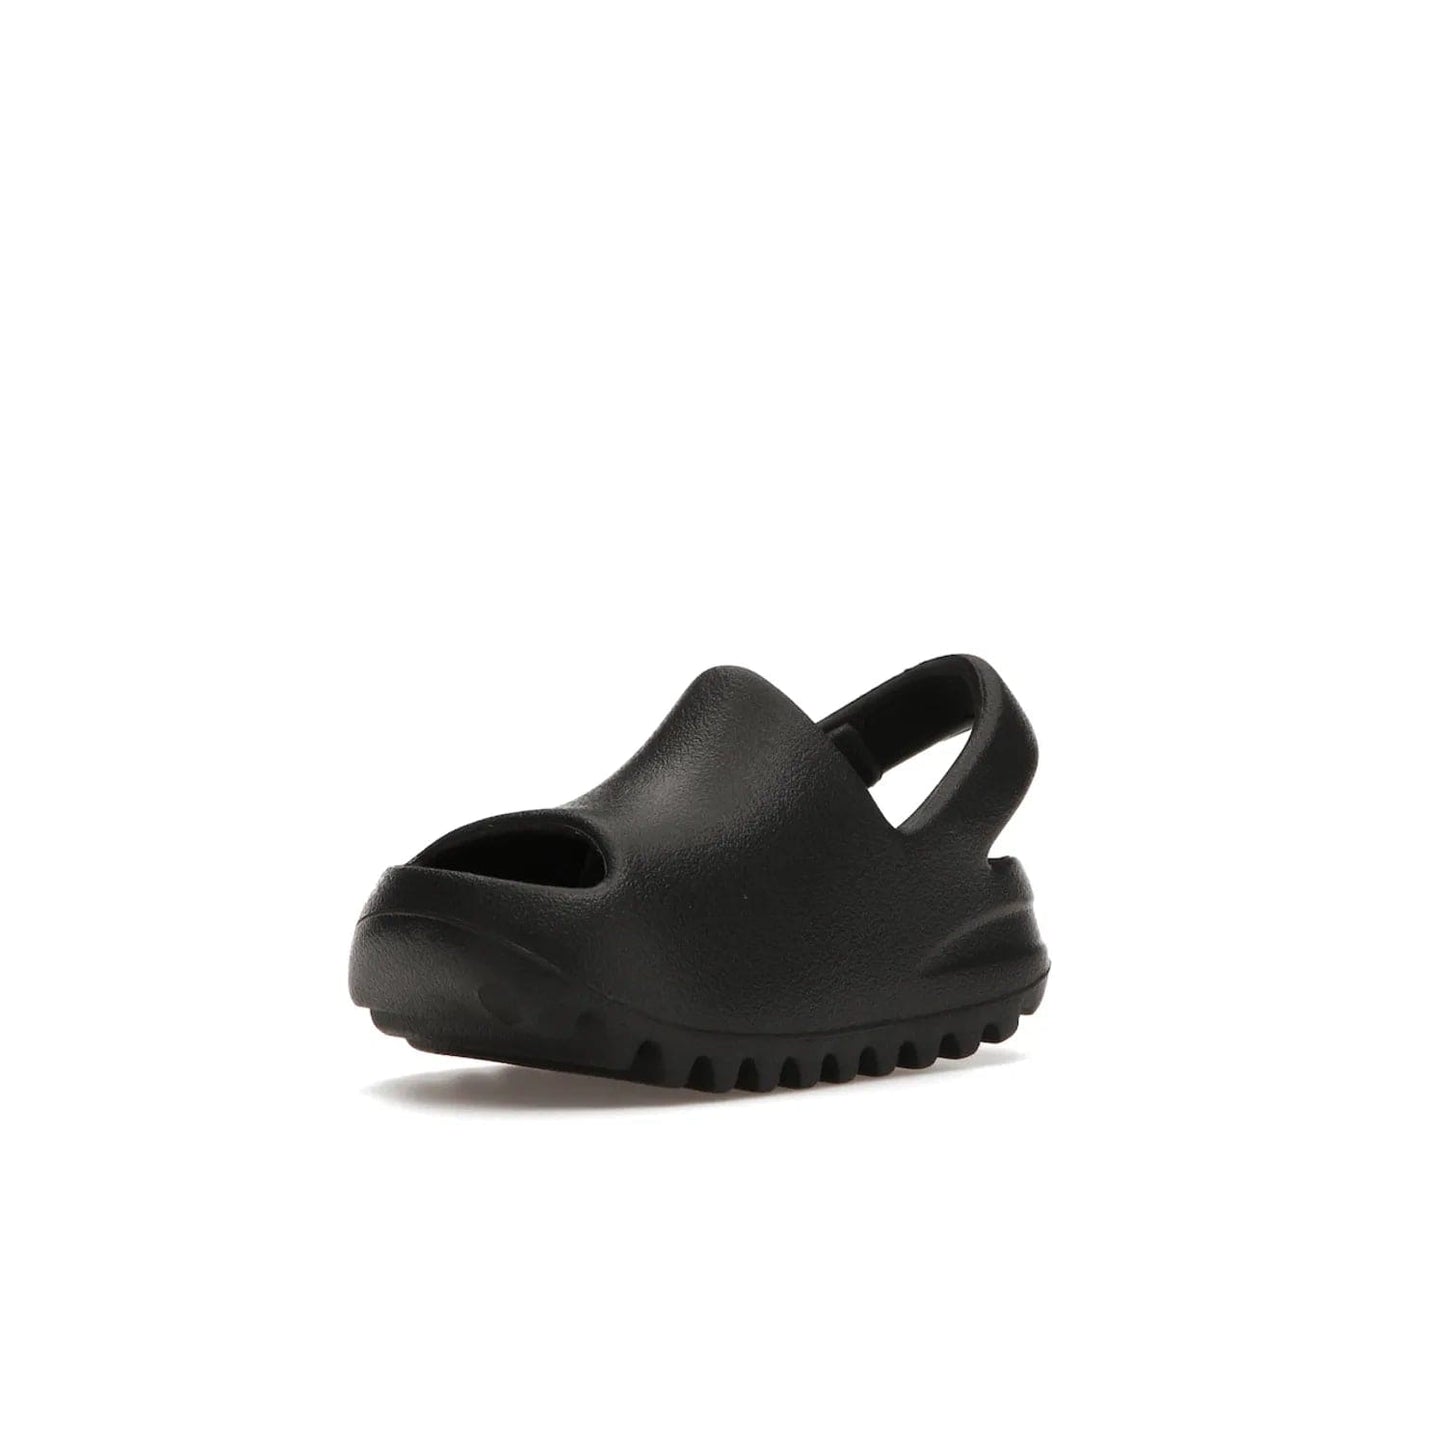 adidas Yeezy Slide Onyx (Infants) - Image 15 - Only at www.BallersClubKickz.com - The Adidas Yeezy Slide Onyx (Infant) is a classic silhouette with unique features and durable EVA foam. Released in May 2021 with a starting price of $70, it's no wonder it quickly gained popularity with its cool, minimalist look.